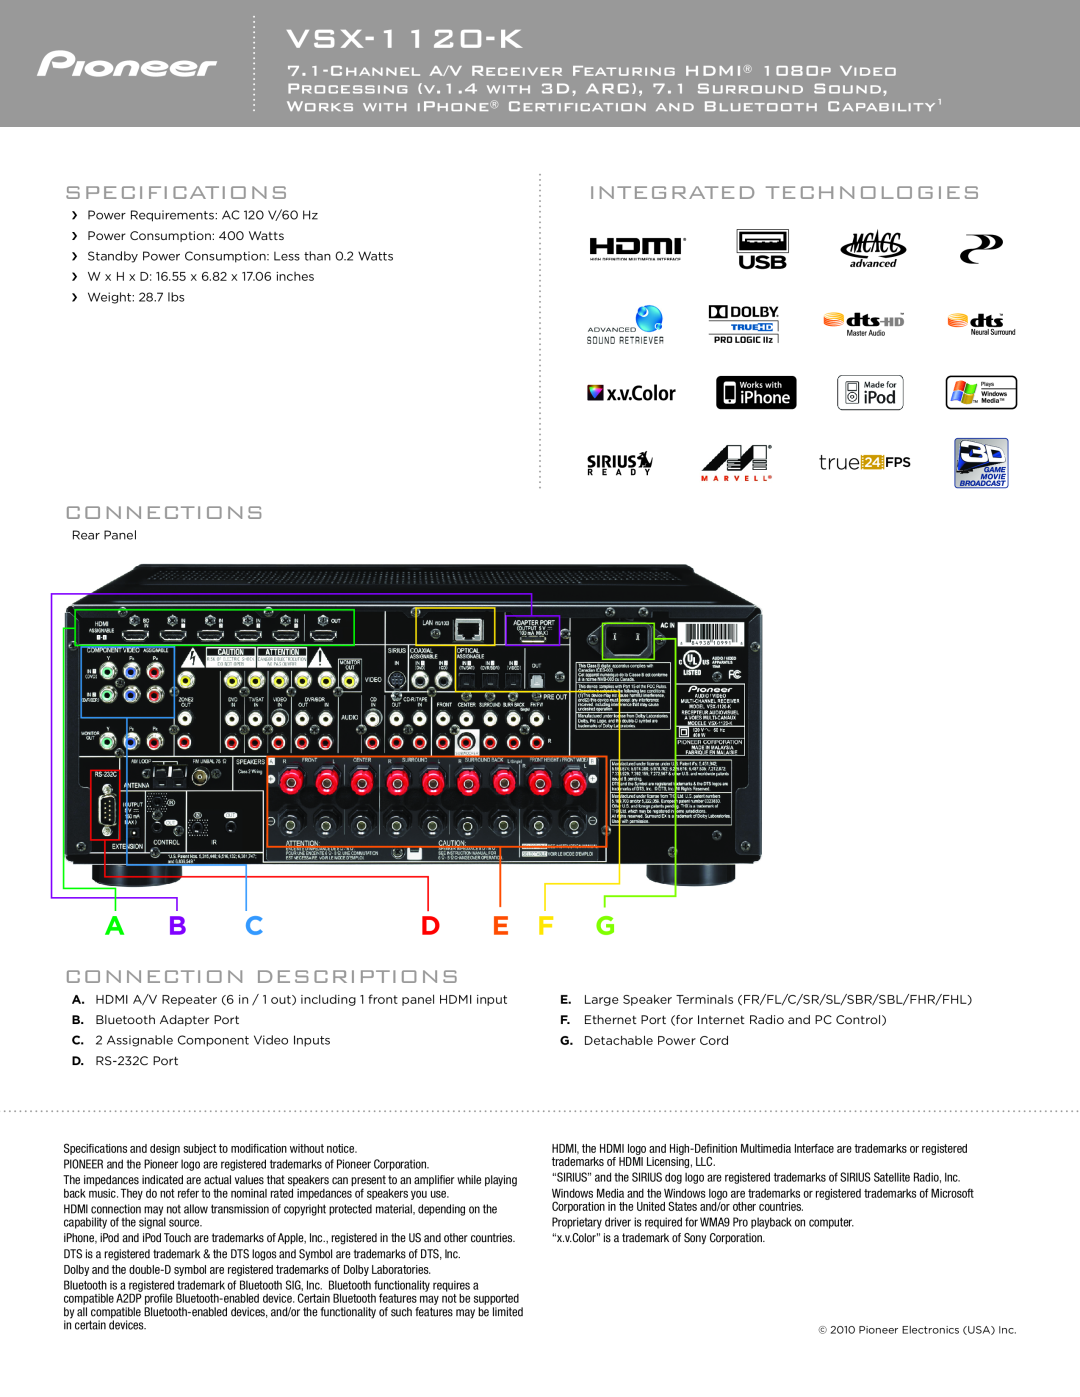 Pioneer VSX-1120-K manual Specifications, Integrated Technologies, Connections, Connection Descriptions, A B C D E F G 